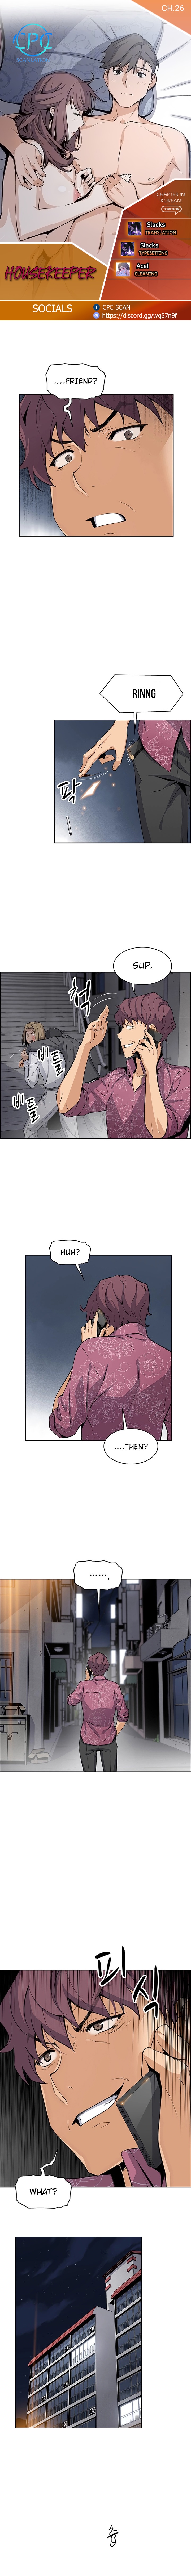 Housekeeper Manhwa - Chapter 26 Page 1